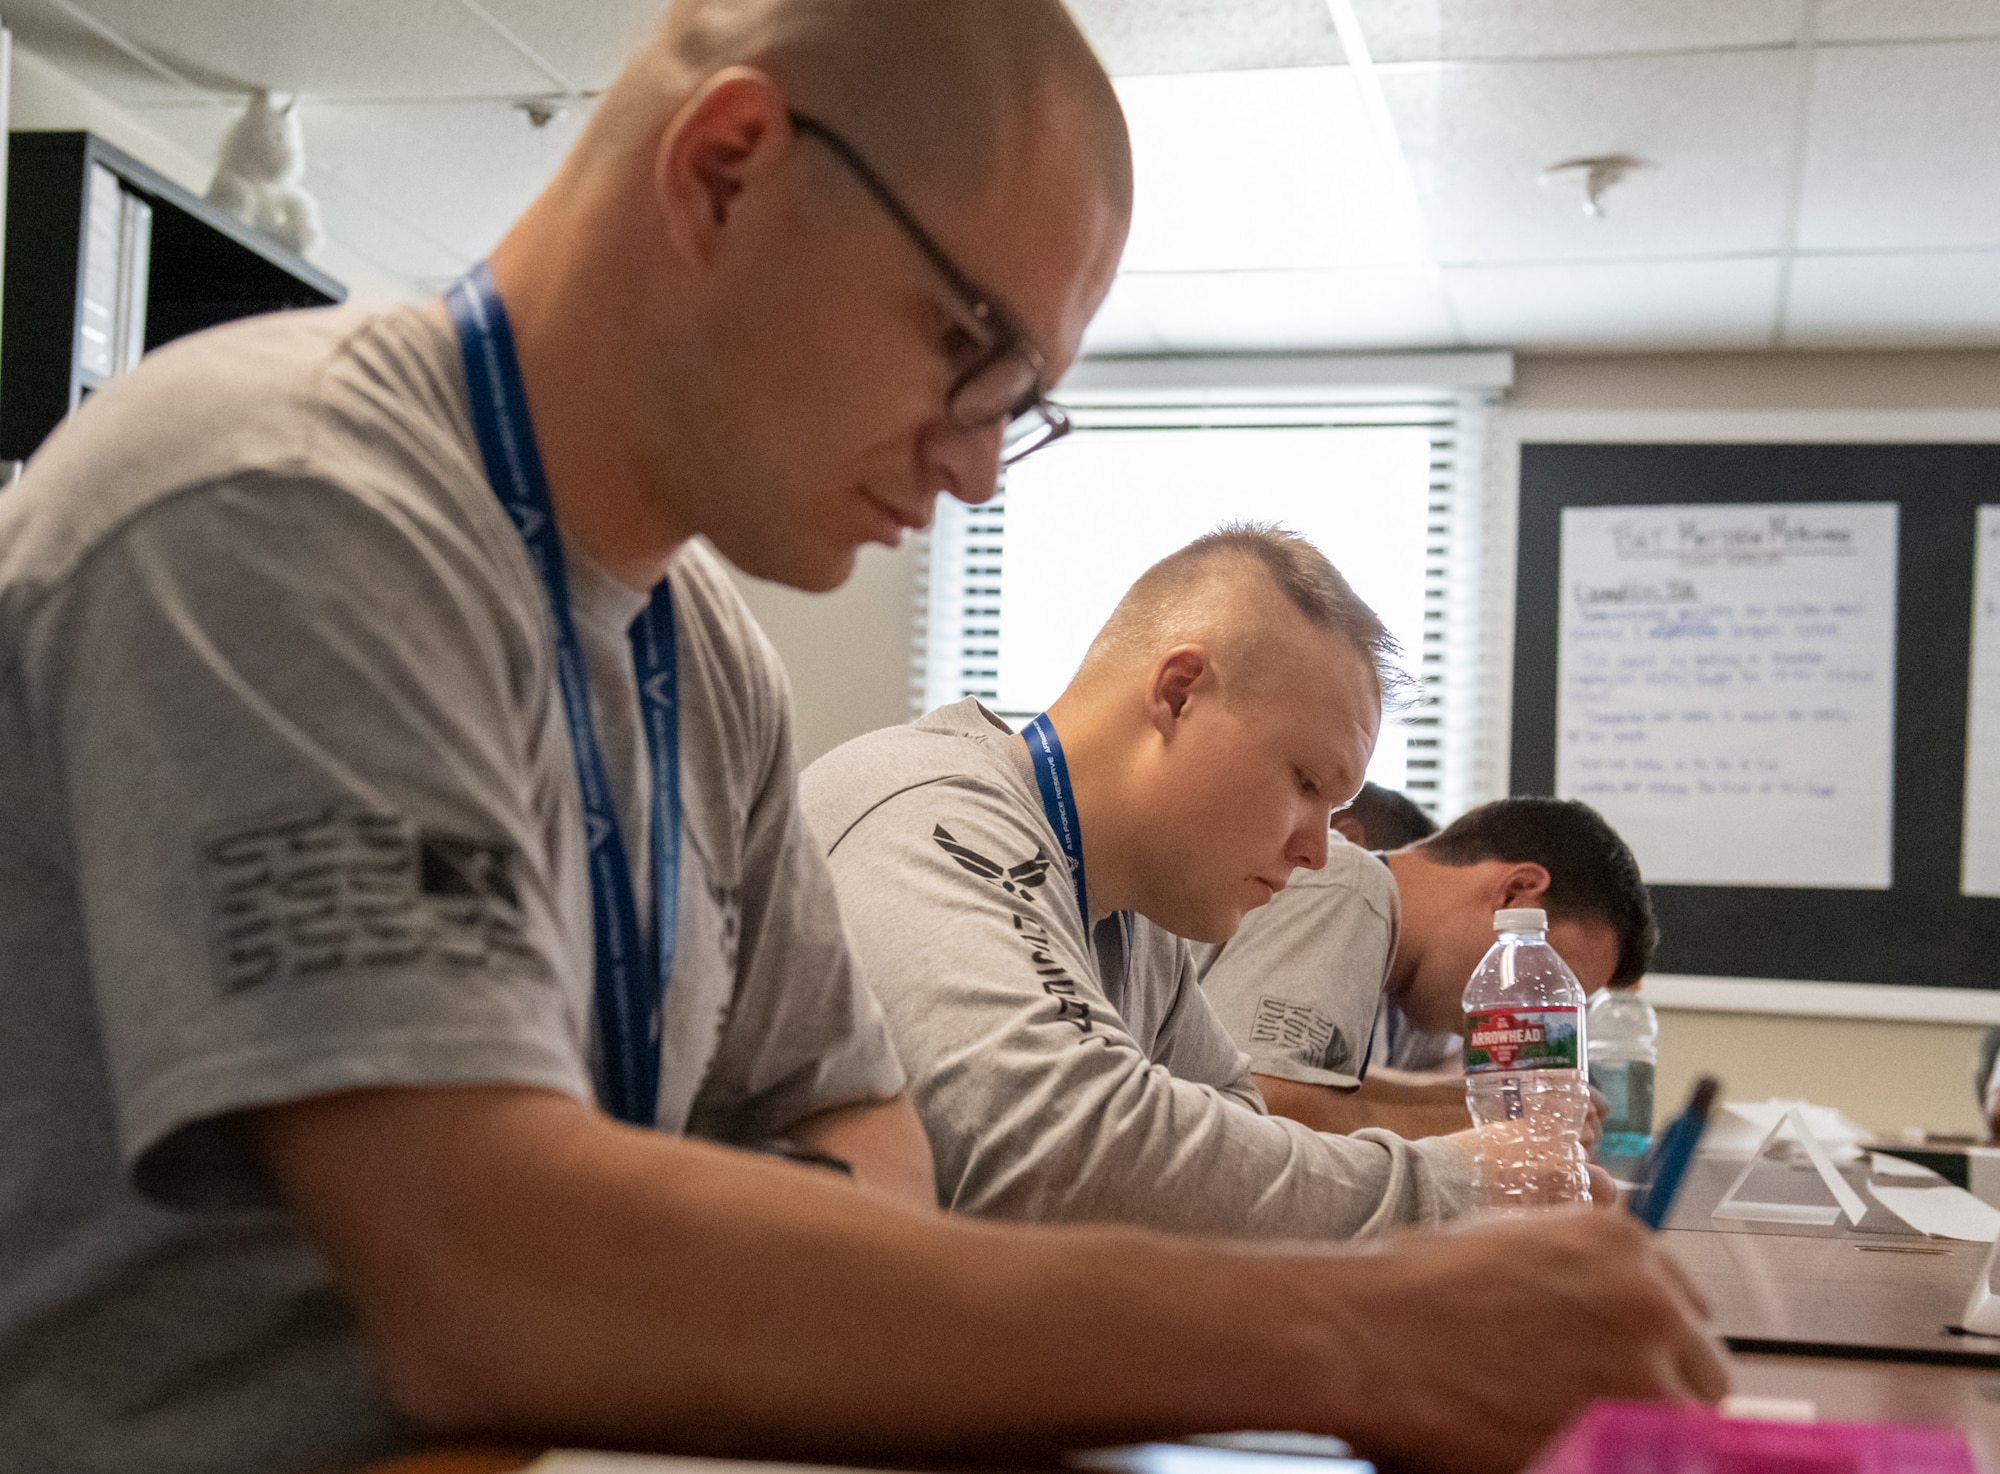 Trainees from the 419th Fighter Wing’s Development and Training Flight fill out forms to submit to their recruiters. Trainees maintain contact with their recruiters to ensure they are prepared for Basic Military Training. (U.S. Air Force photo by Senior Airman Kayla Ellis)